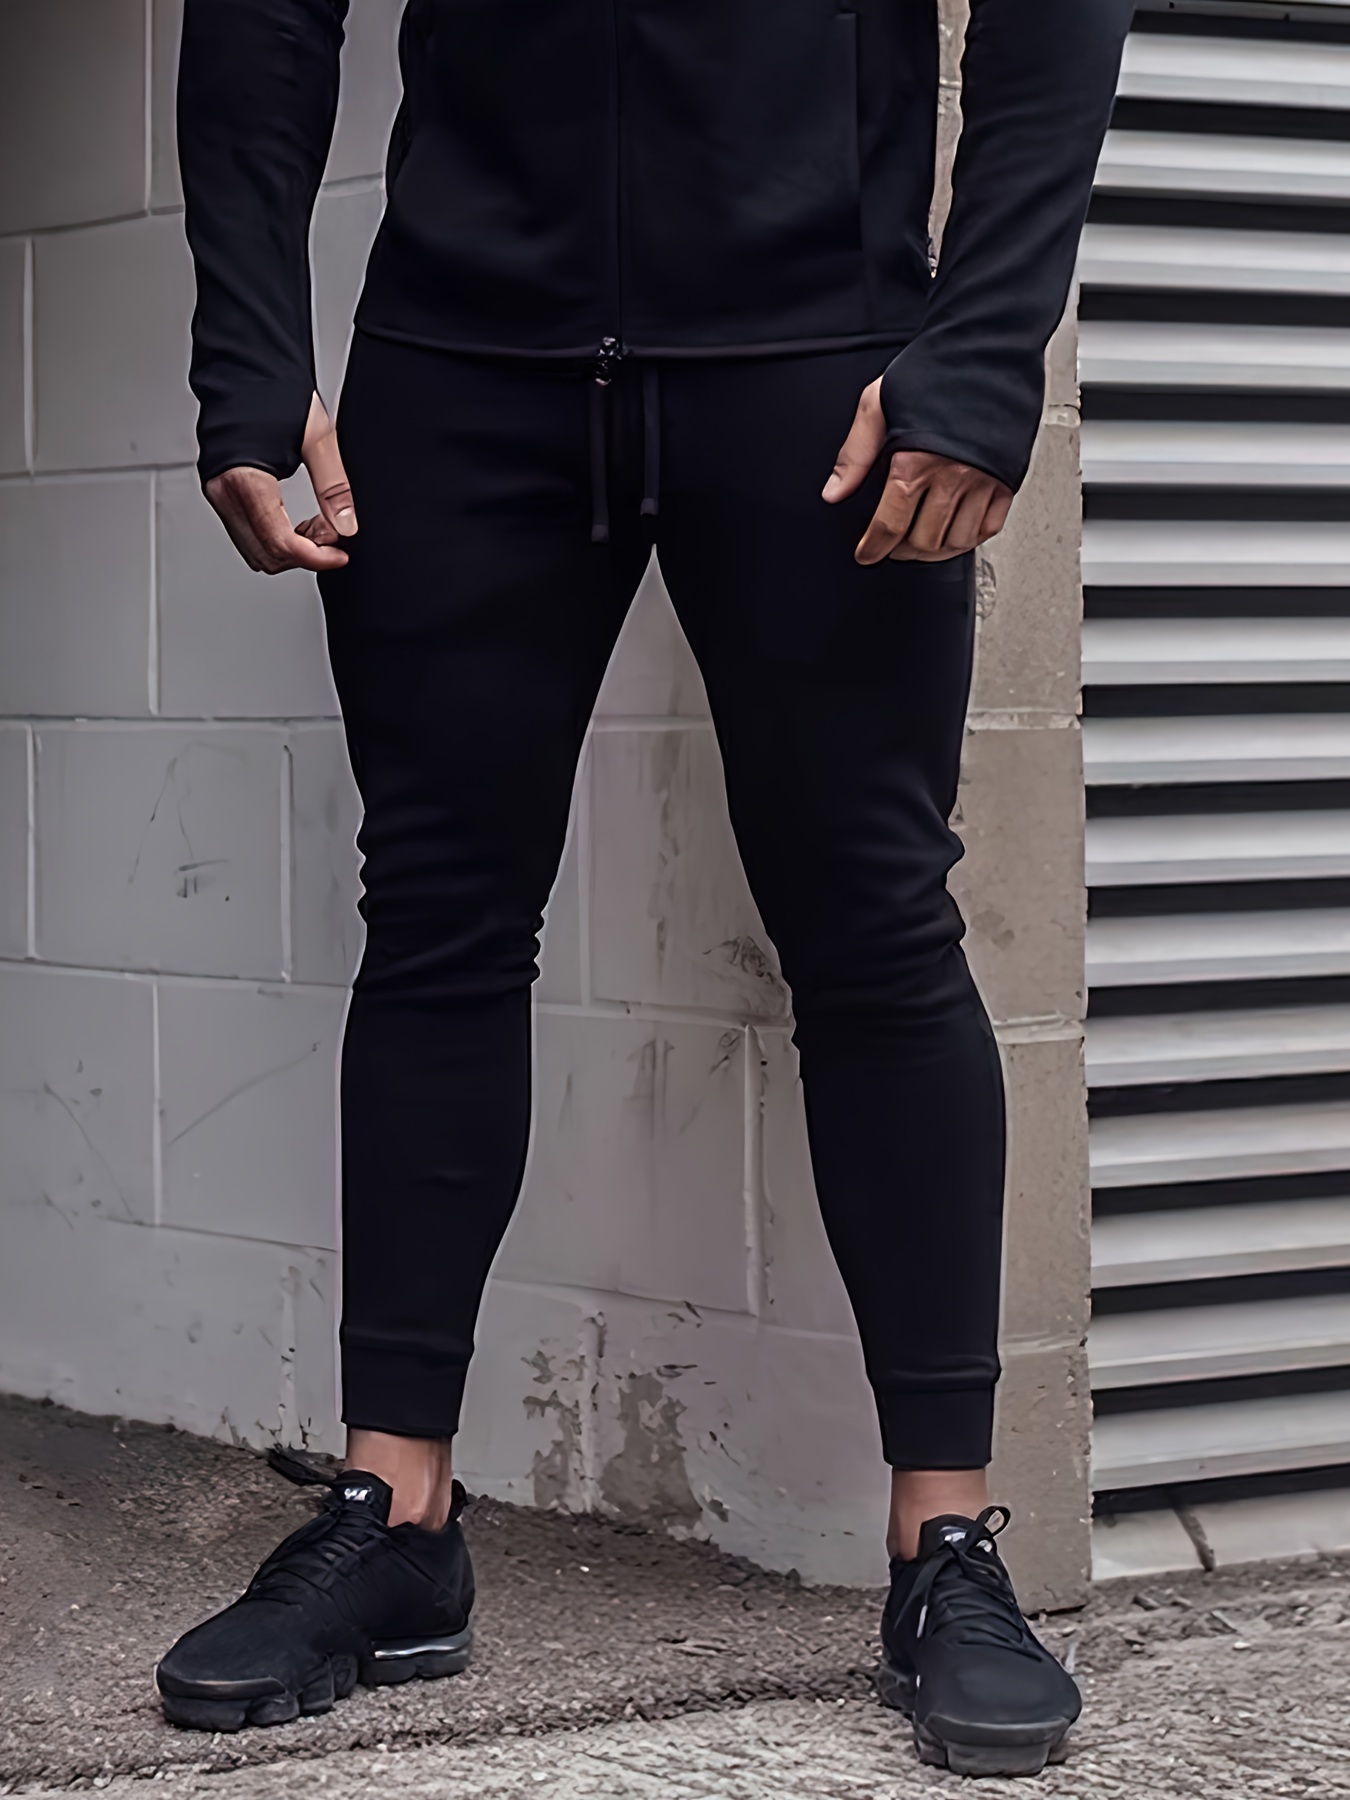 Man Active Gym Tapered Fit Sweatpants